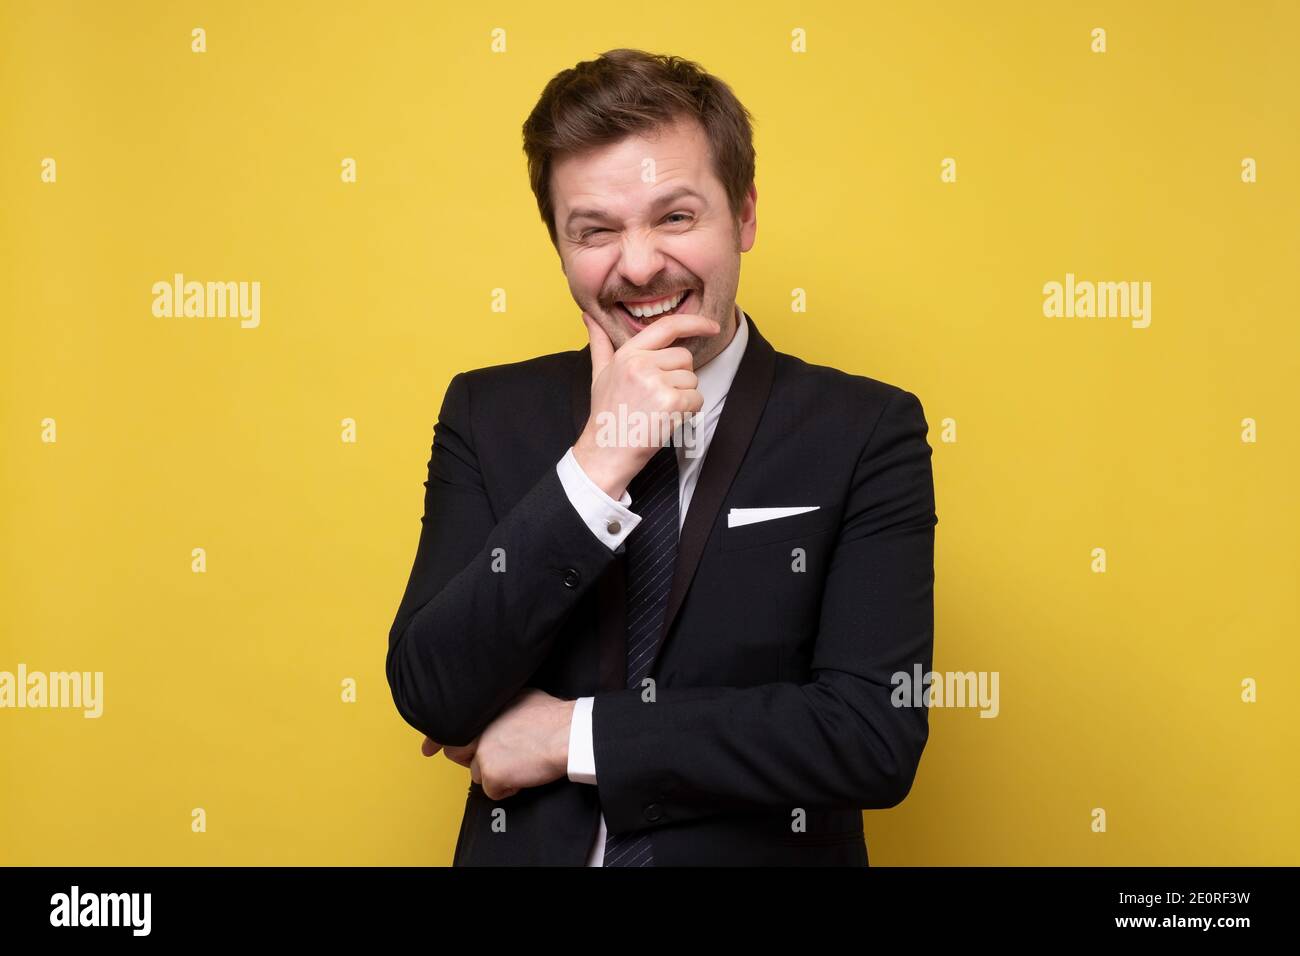 Young happy cheerful young man in suit laughing on your joke. Studio shot on yellow wall. Stock Photo